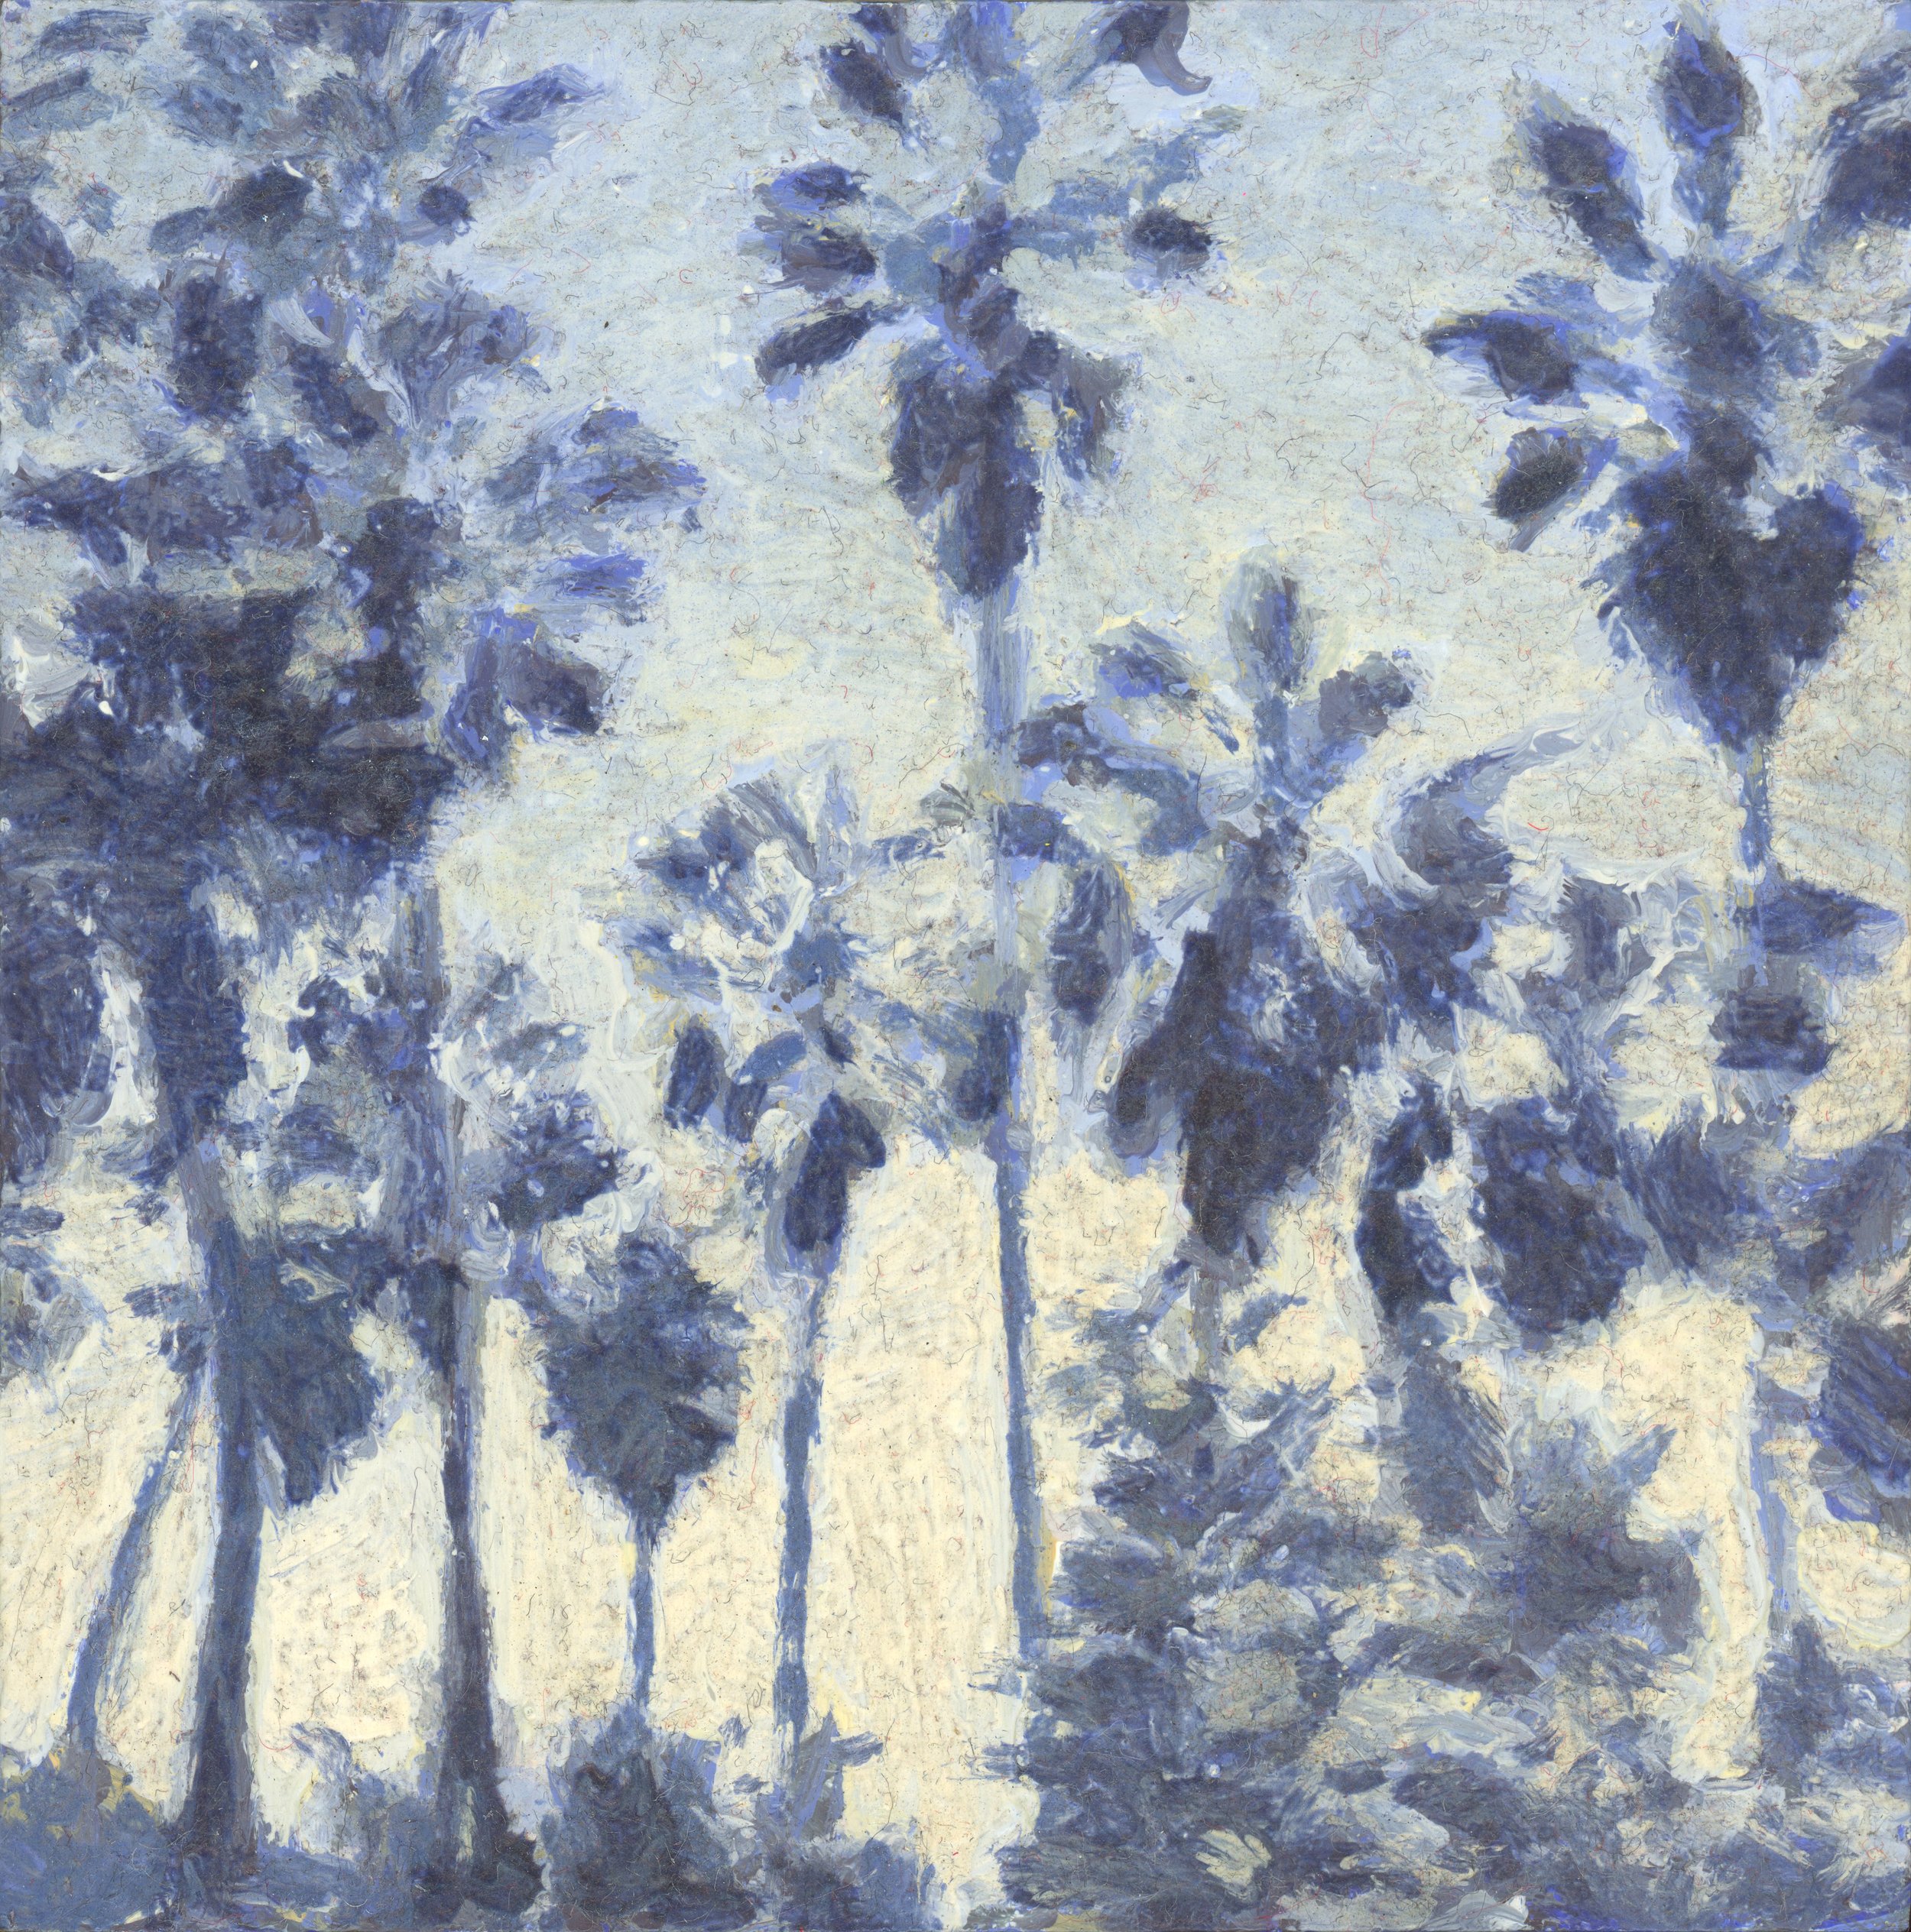    Palms, 2020  Oil on panel  4 in x 4 in   